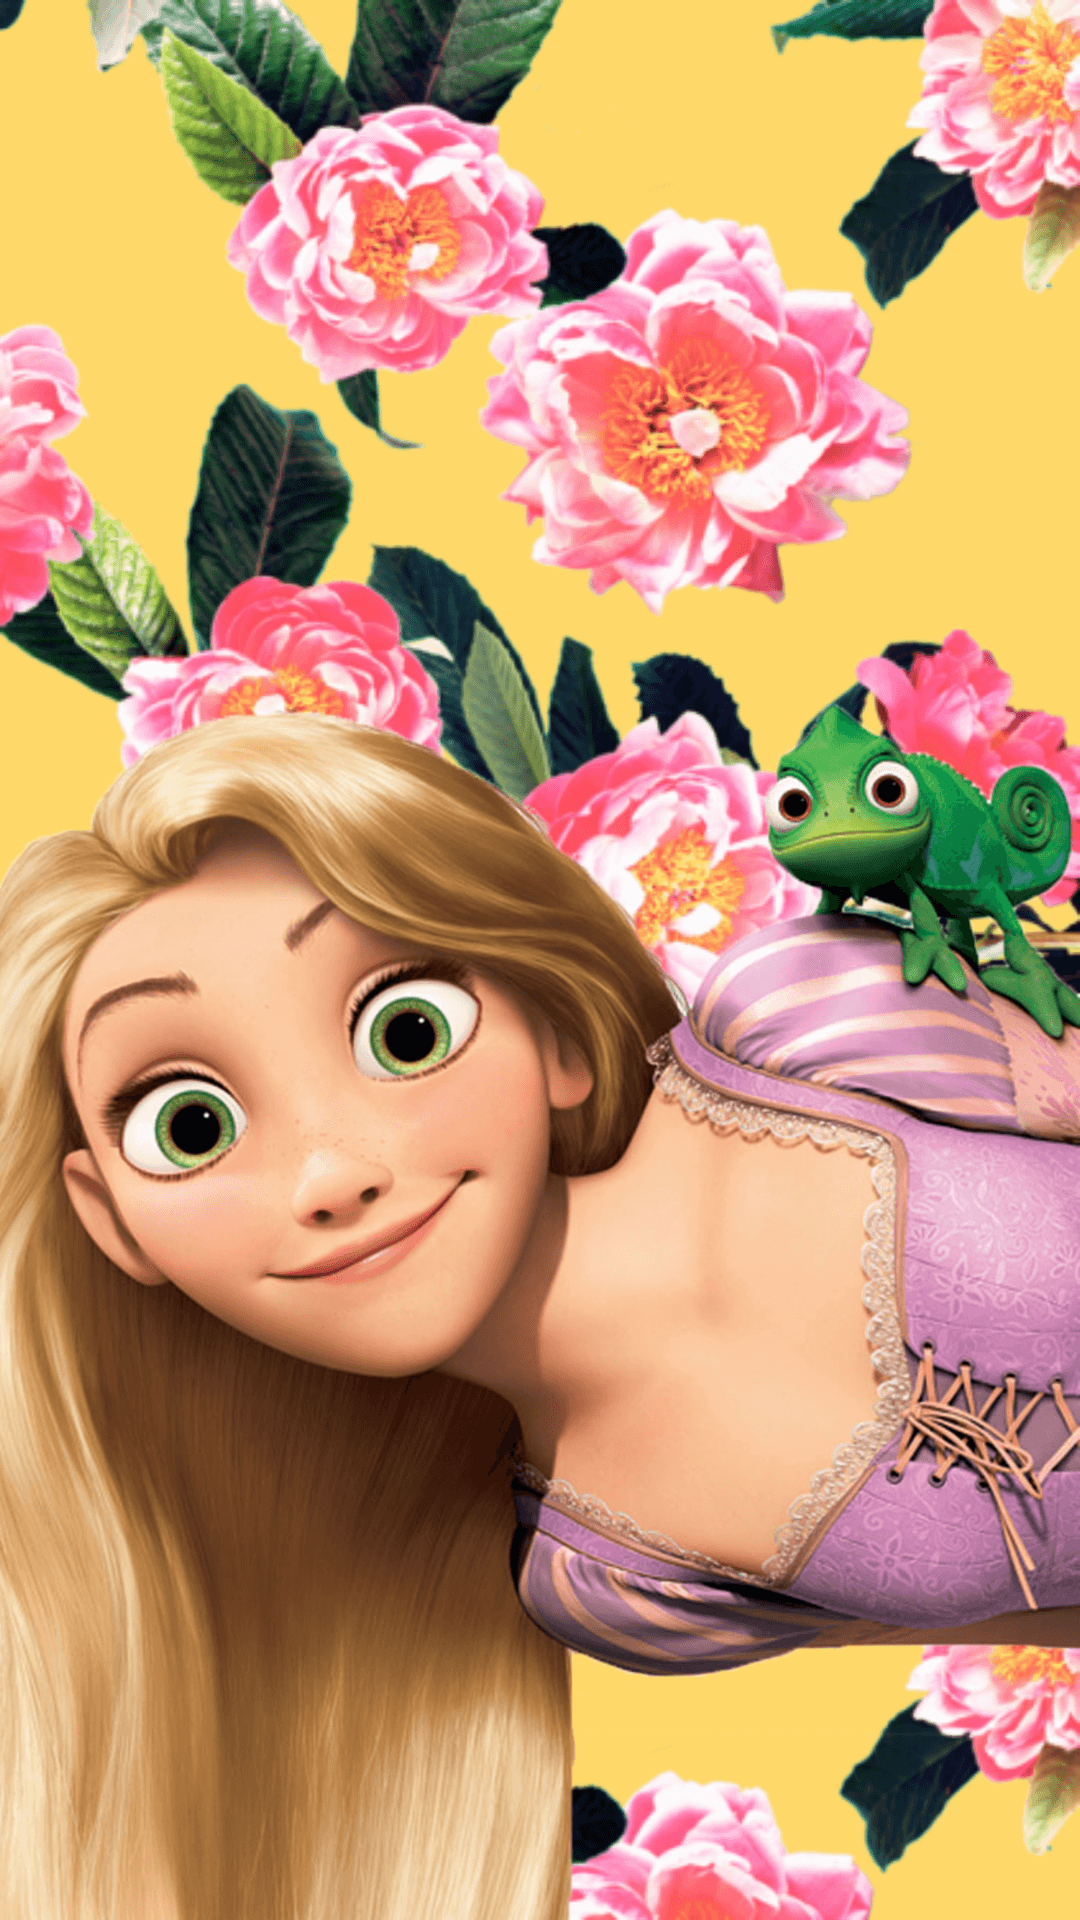 A girl with long hair and flowers - Rapunzel